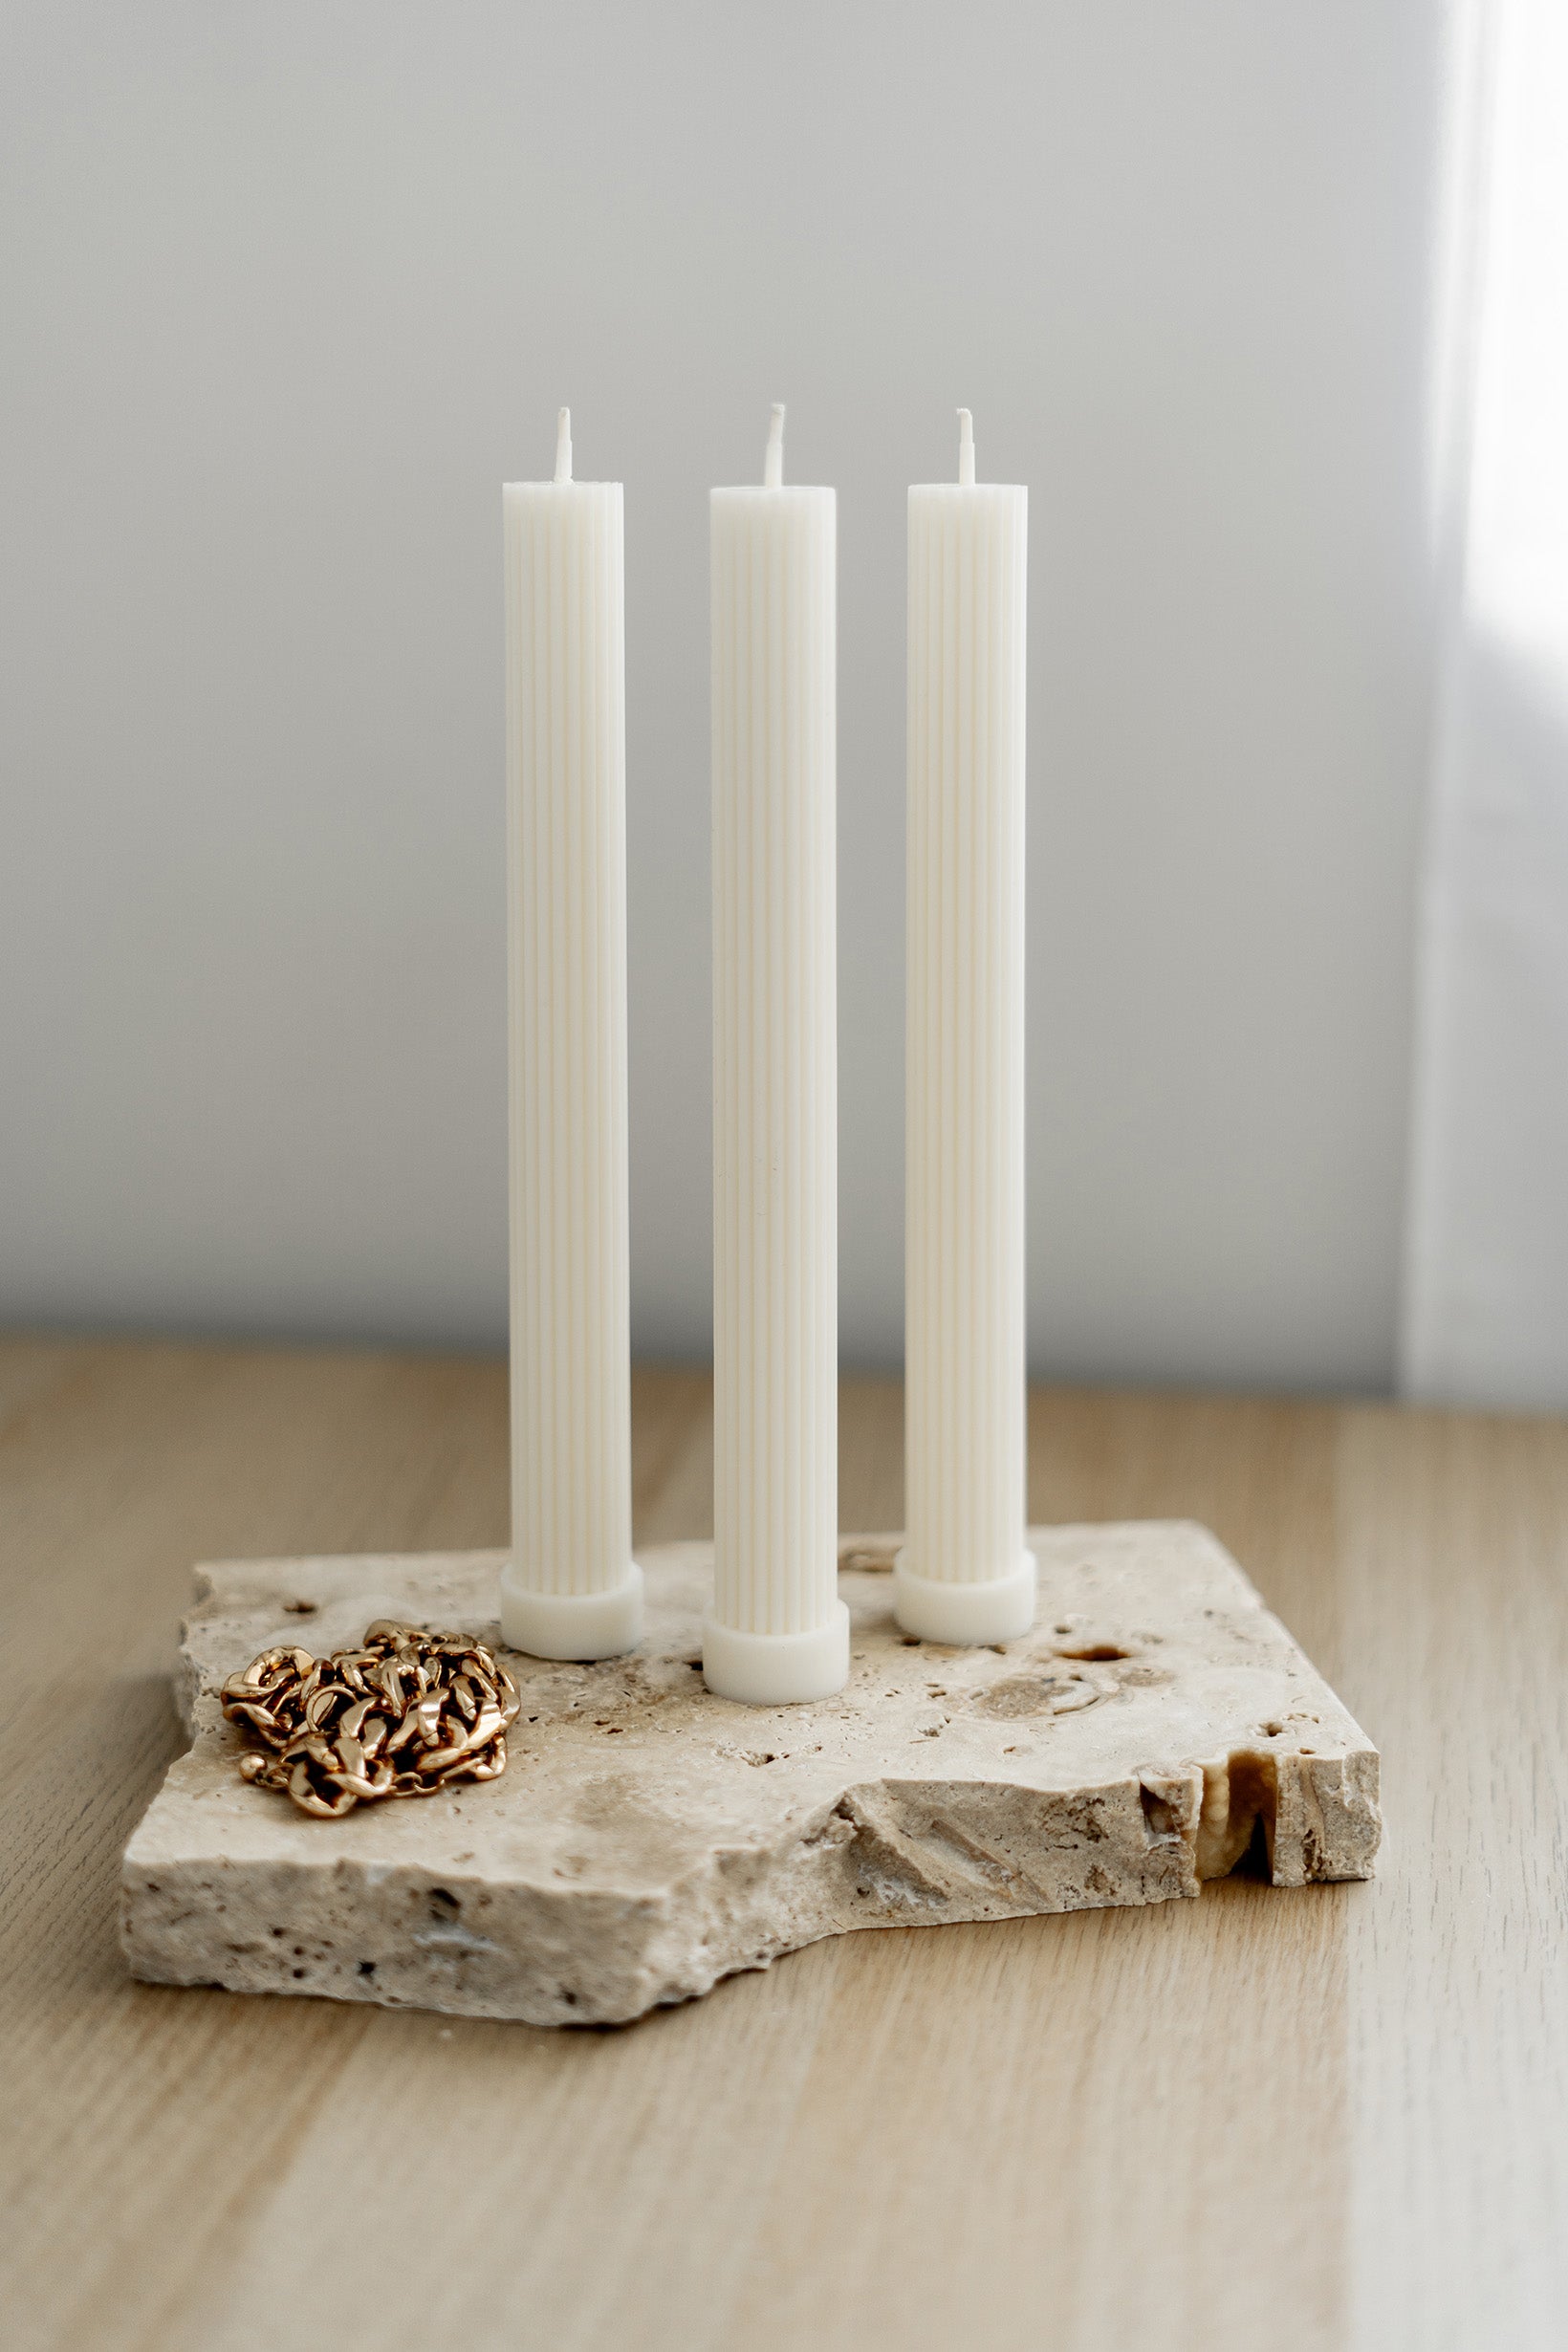 Base Ribbed Pillar Candle Mould 0 - Silicone Mould, Mold for DIY Candles. Created using candle making kit with cotton candle wicks and candle colour chips. Using soy wax for pillar candles. Sold by Myka Candles Moulds Australia